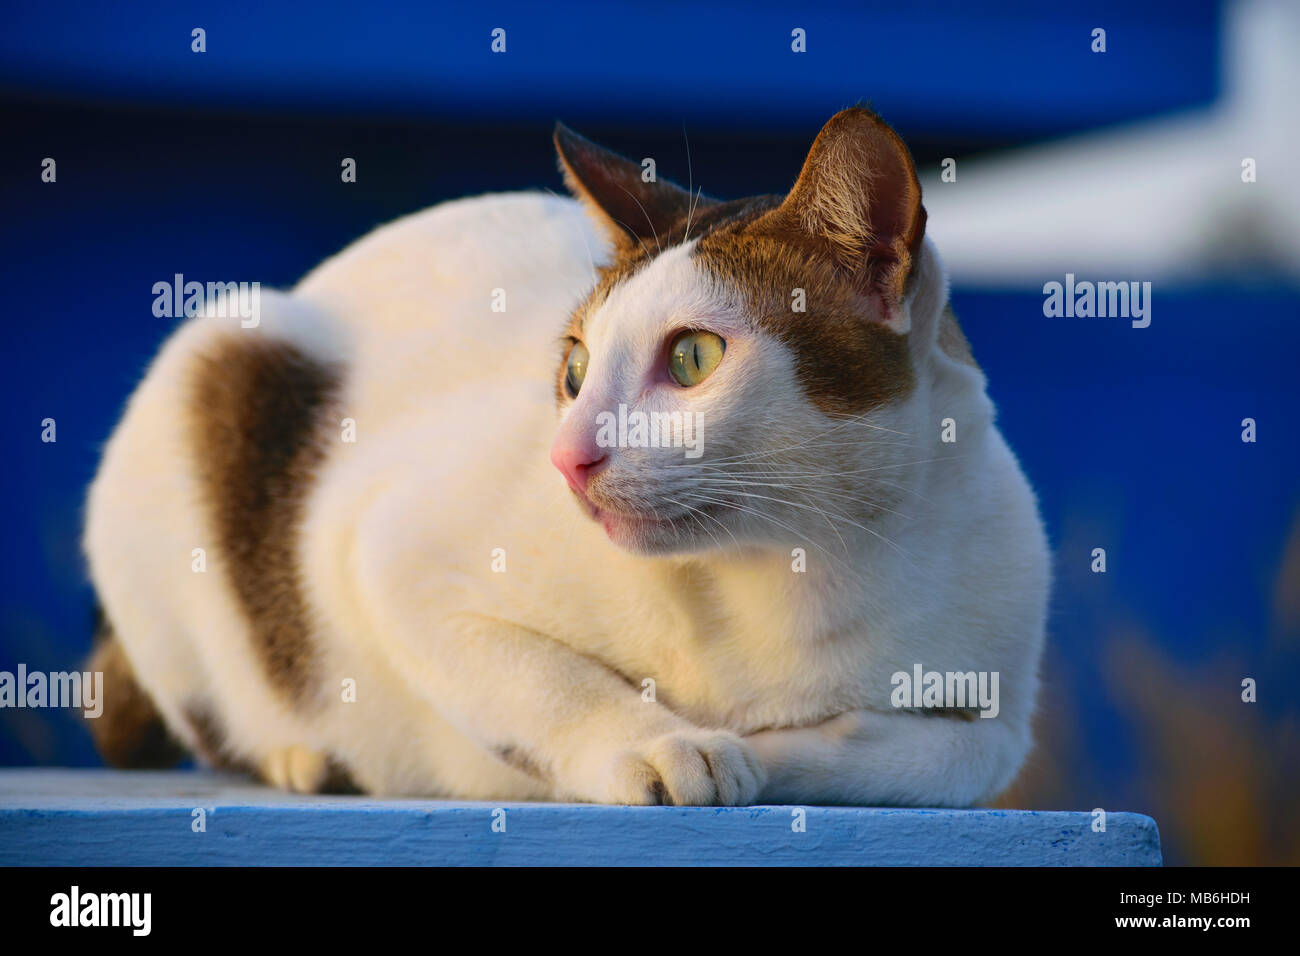 Fury Cat High Resolution Stock Photography and Images - Alamy